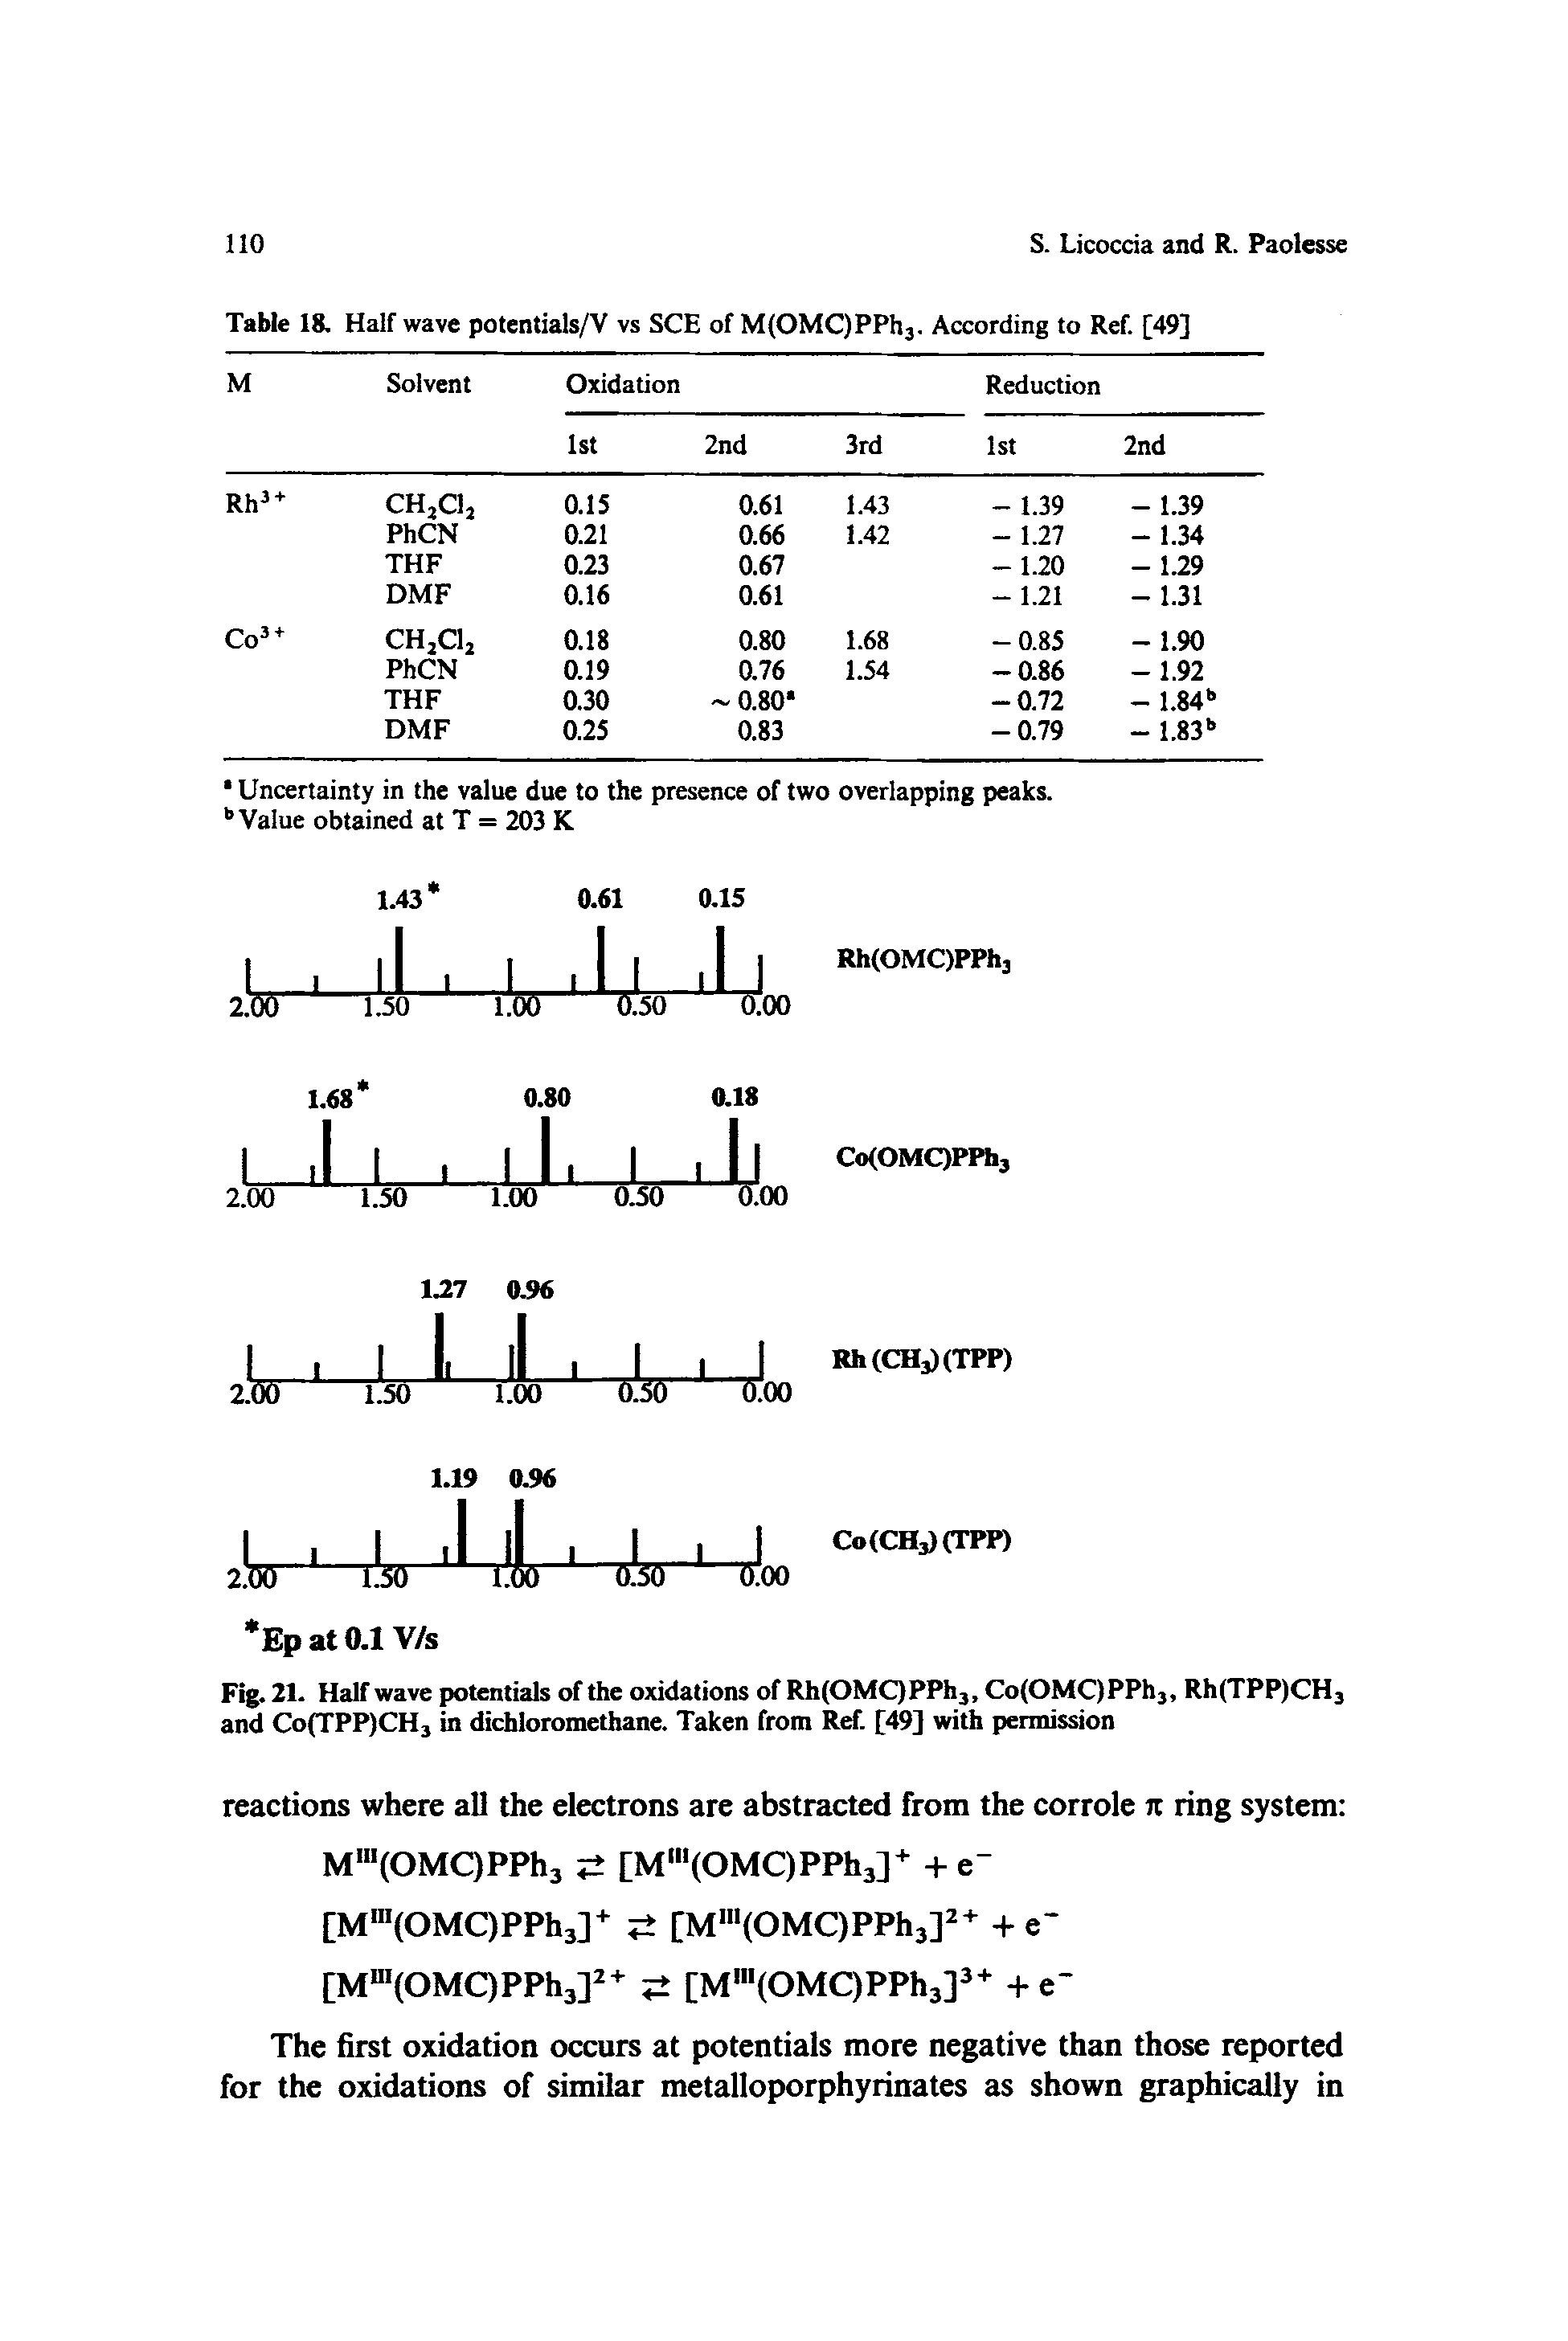 Fig. 21. Half wave potentials of the oxidations of Rh(OMC)PPh3, Co(OMC)PPh3, Rh(TPP)CH3 and Co(TPP)CH3 in dichloromethane. Taken from Ref. [49] with permission...